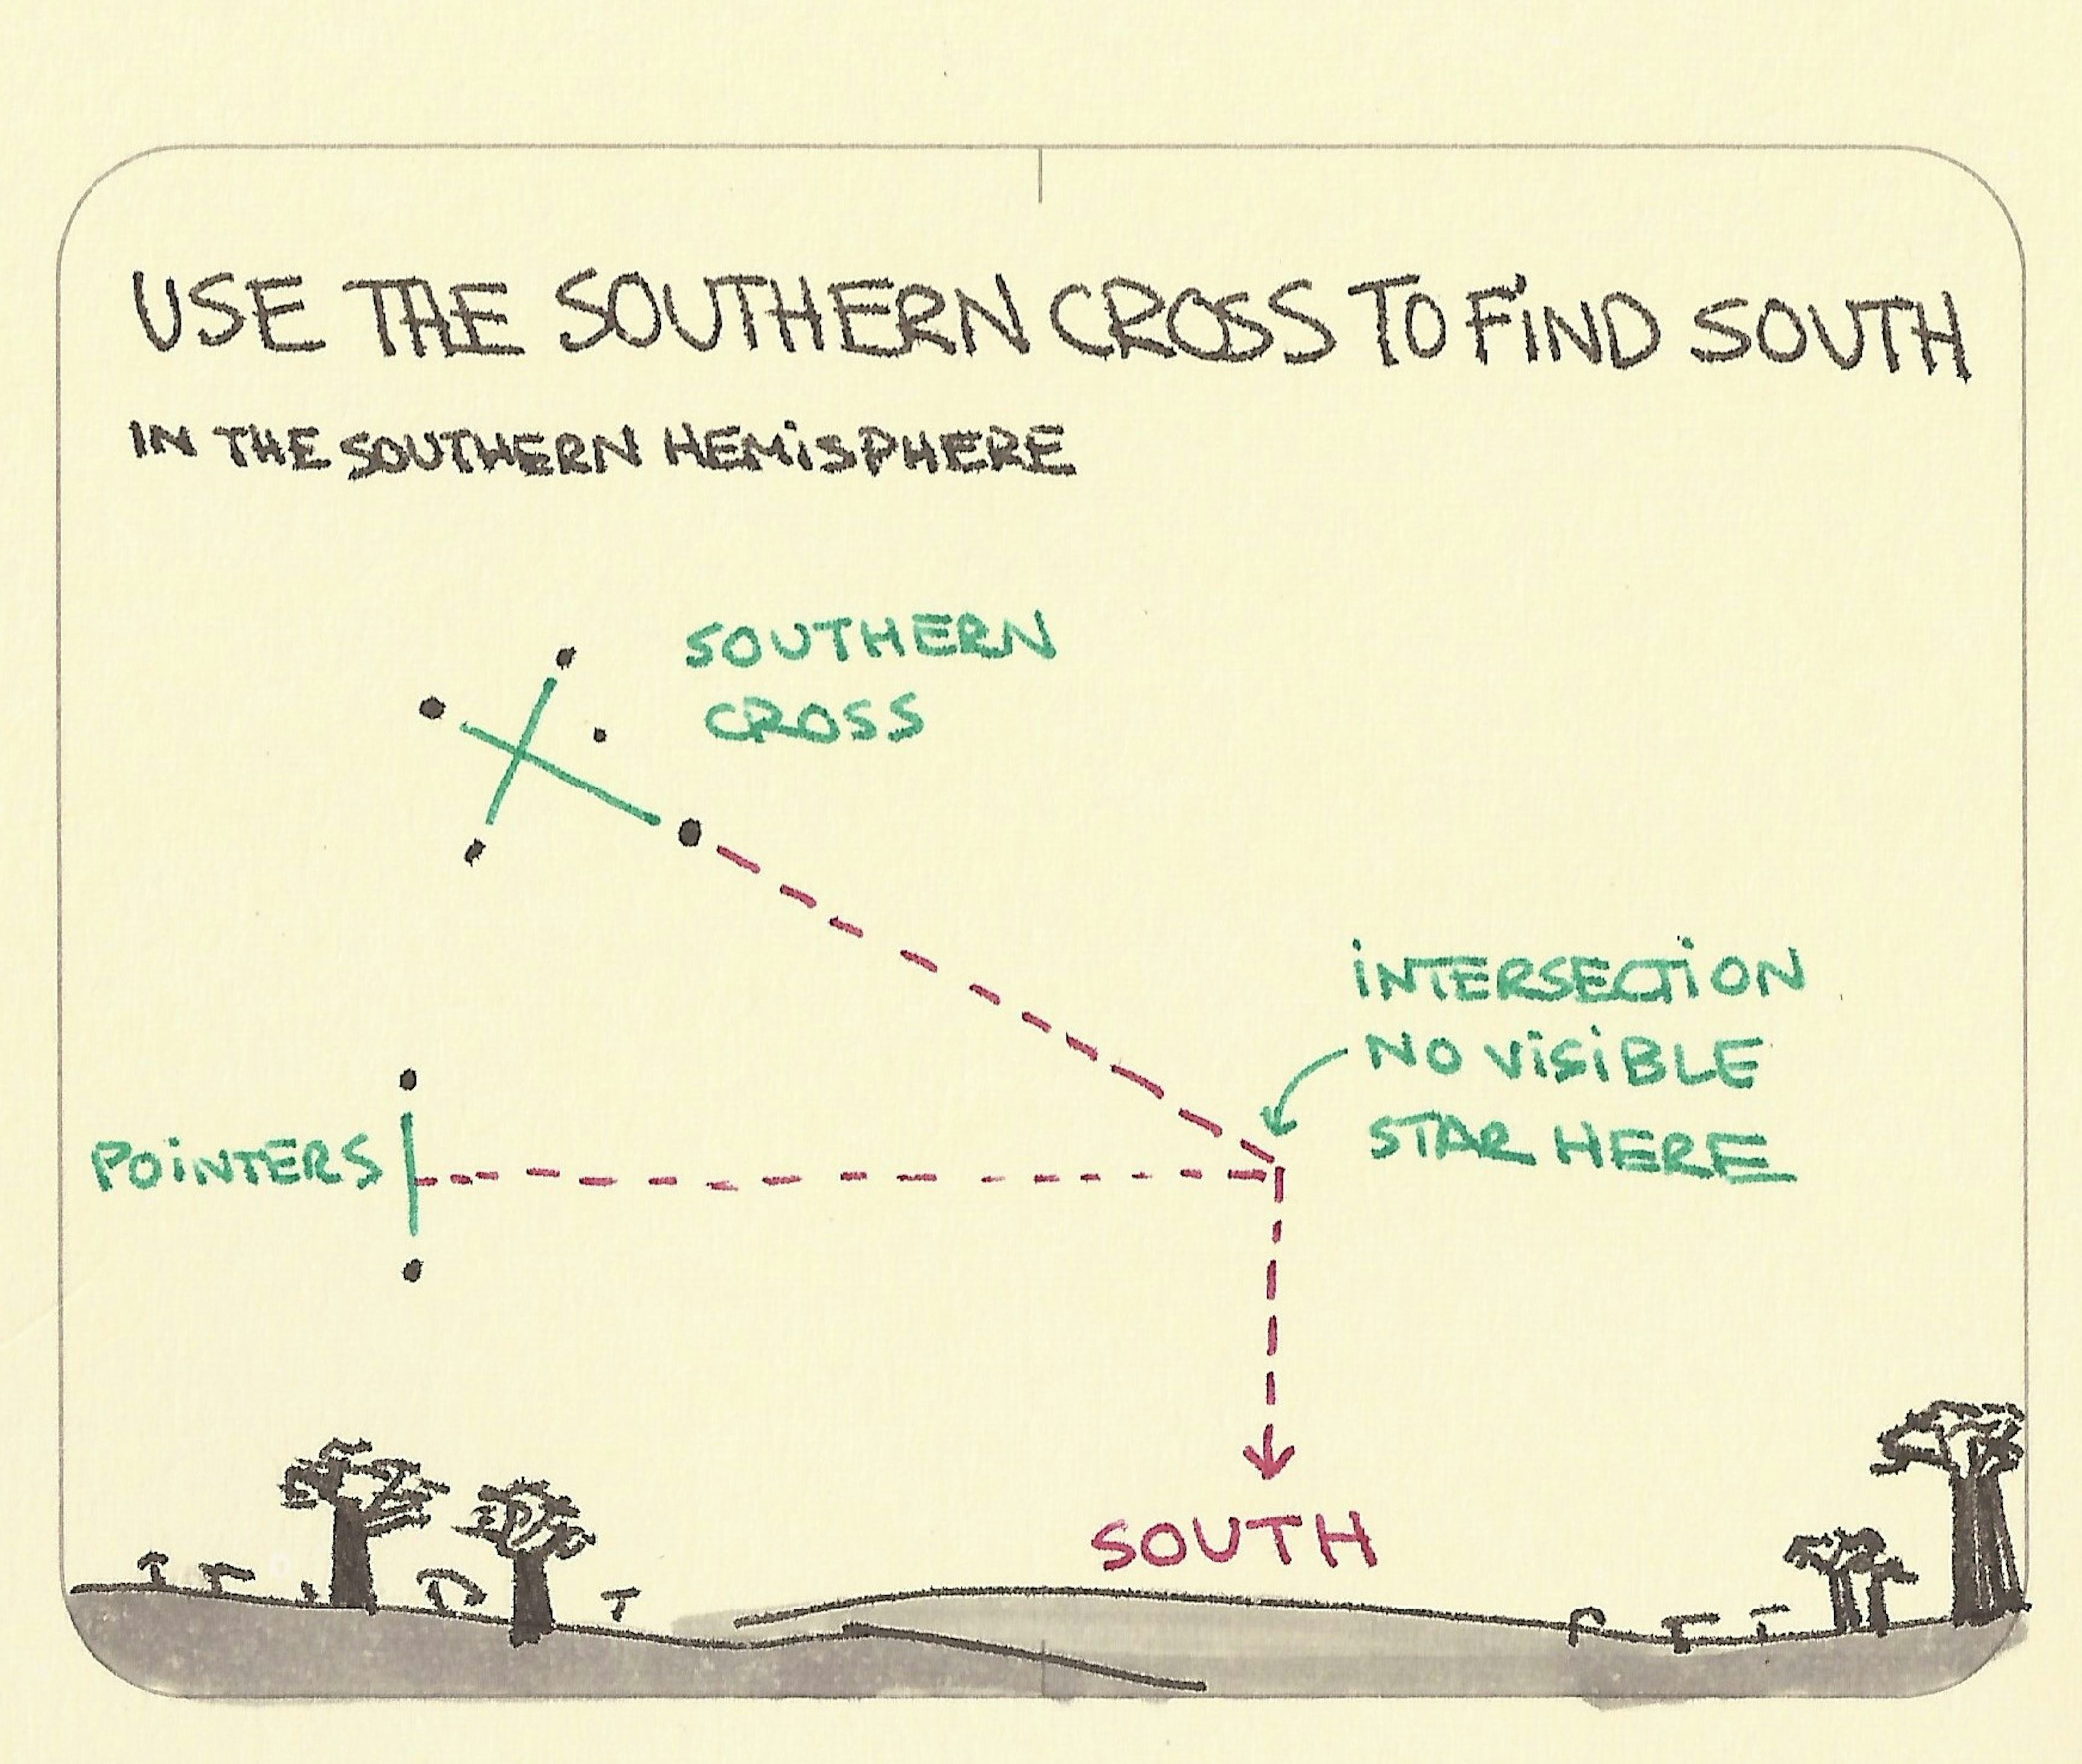 The Southern Cross to find South: Star chart showing how to find South in the Southern hemisphere using star groups called the Southern Cross and The Pointers